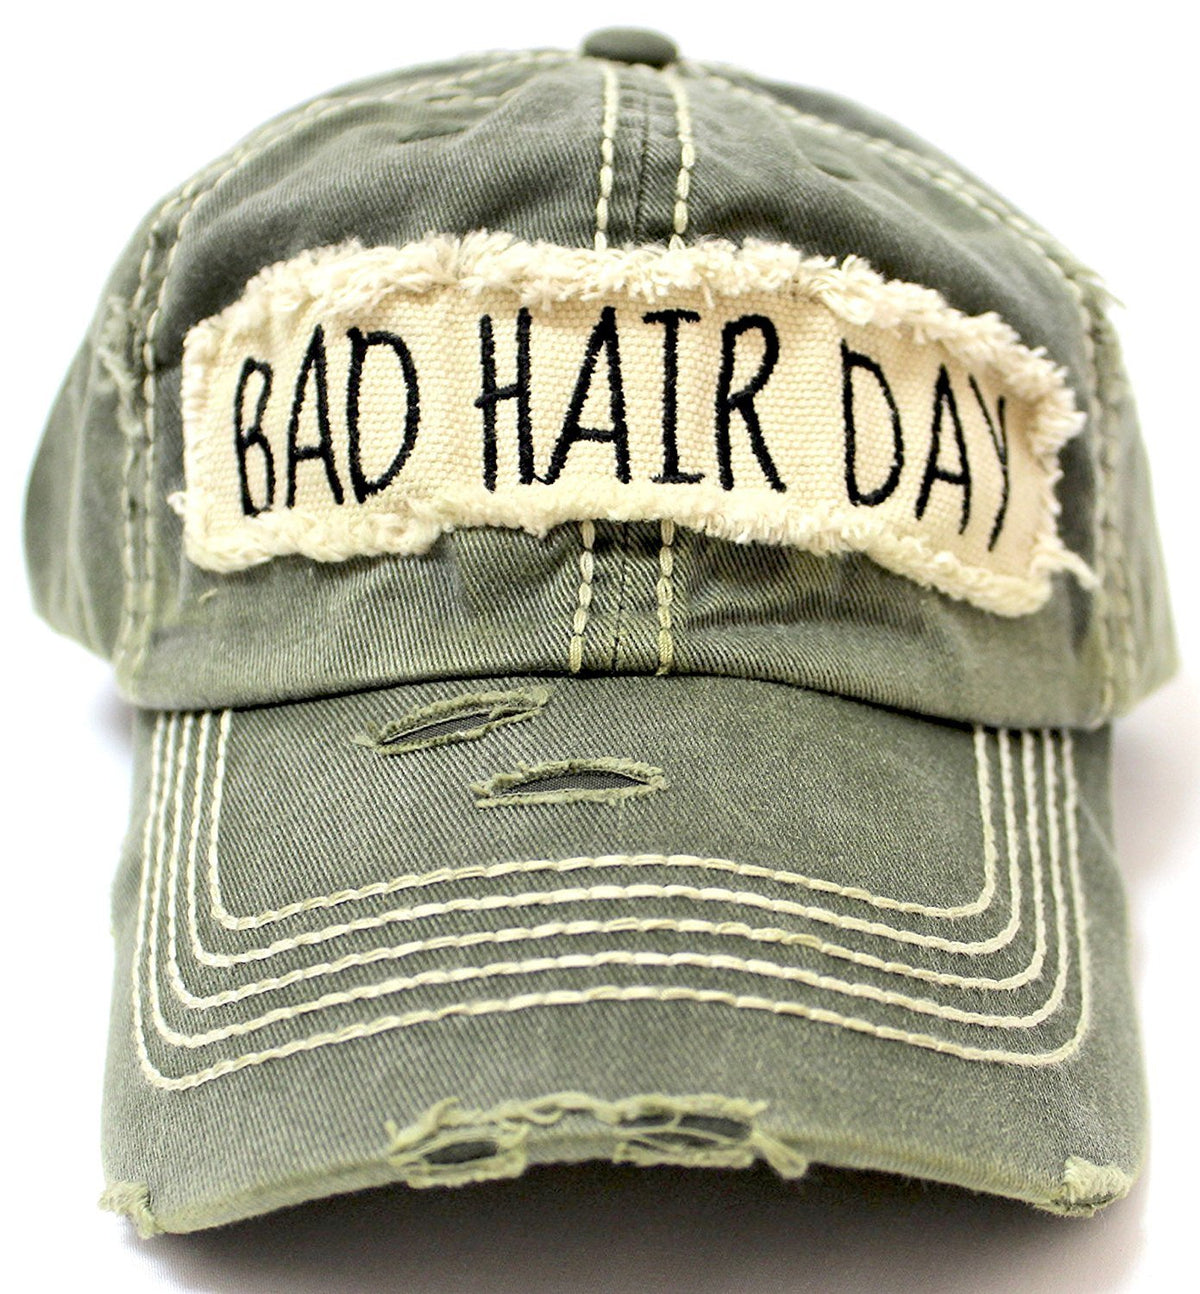 New! Olive "BAD HAIR DAY" Embroidery Patch Baseball Cap - Caps 'N Vintage 